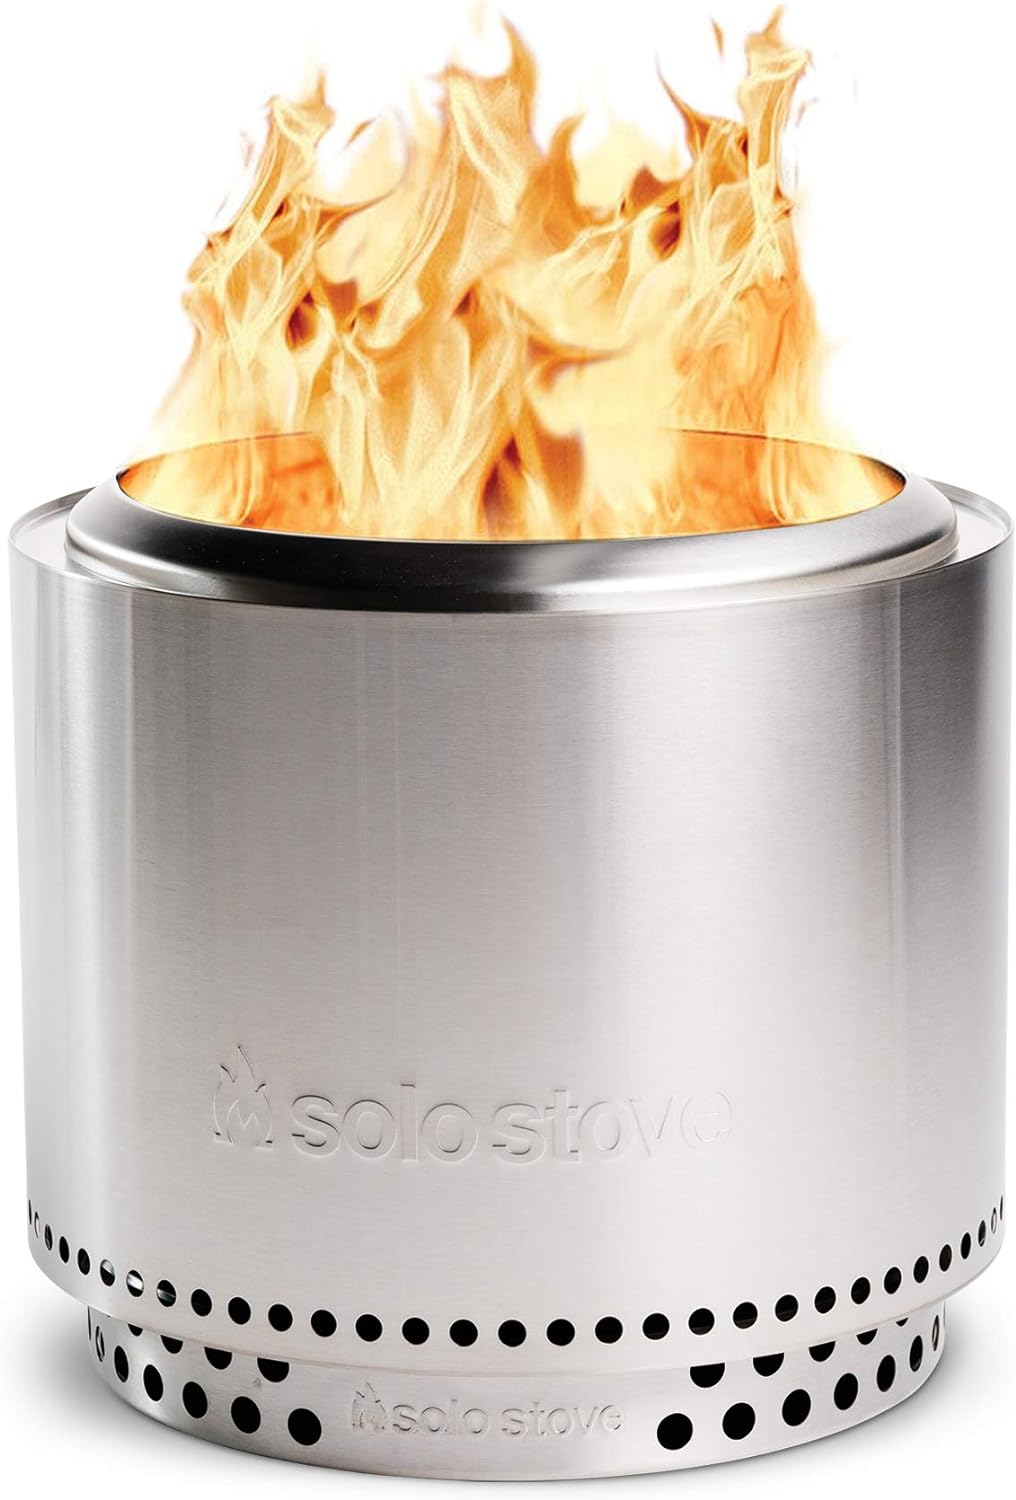 Solo Stove BONFIRE 2.0 + STAND Feuerschale STAINLESS STEEL